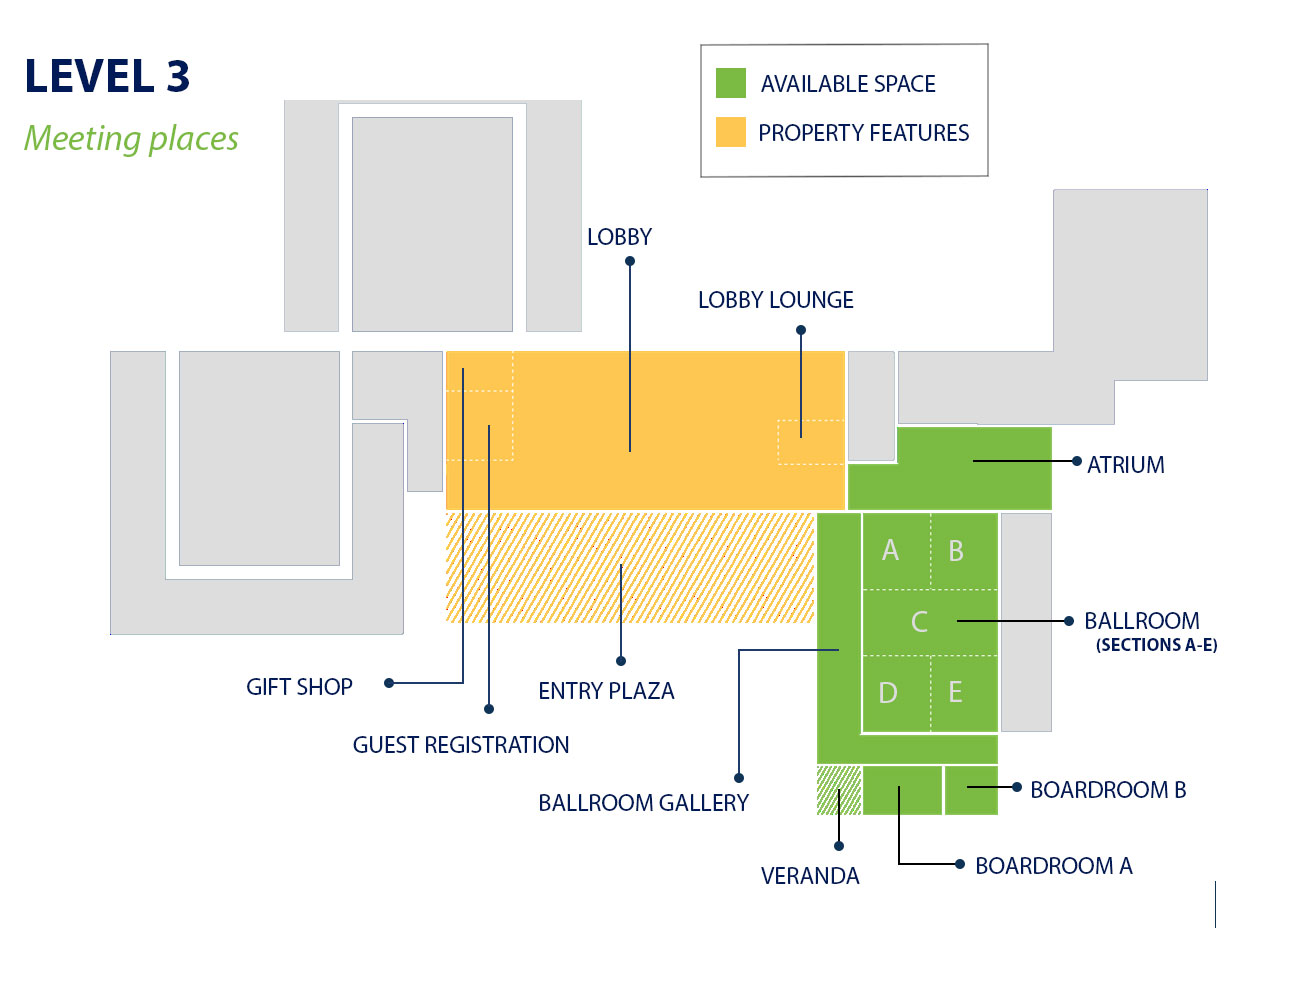 Level 3 meeting places with available space in green and property features in yellow